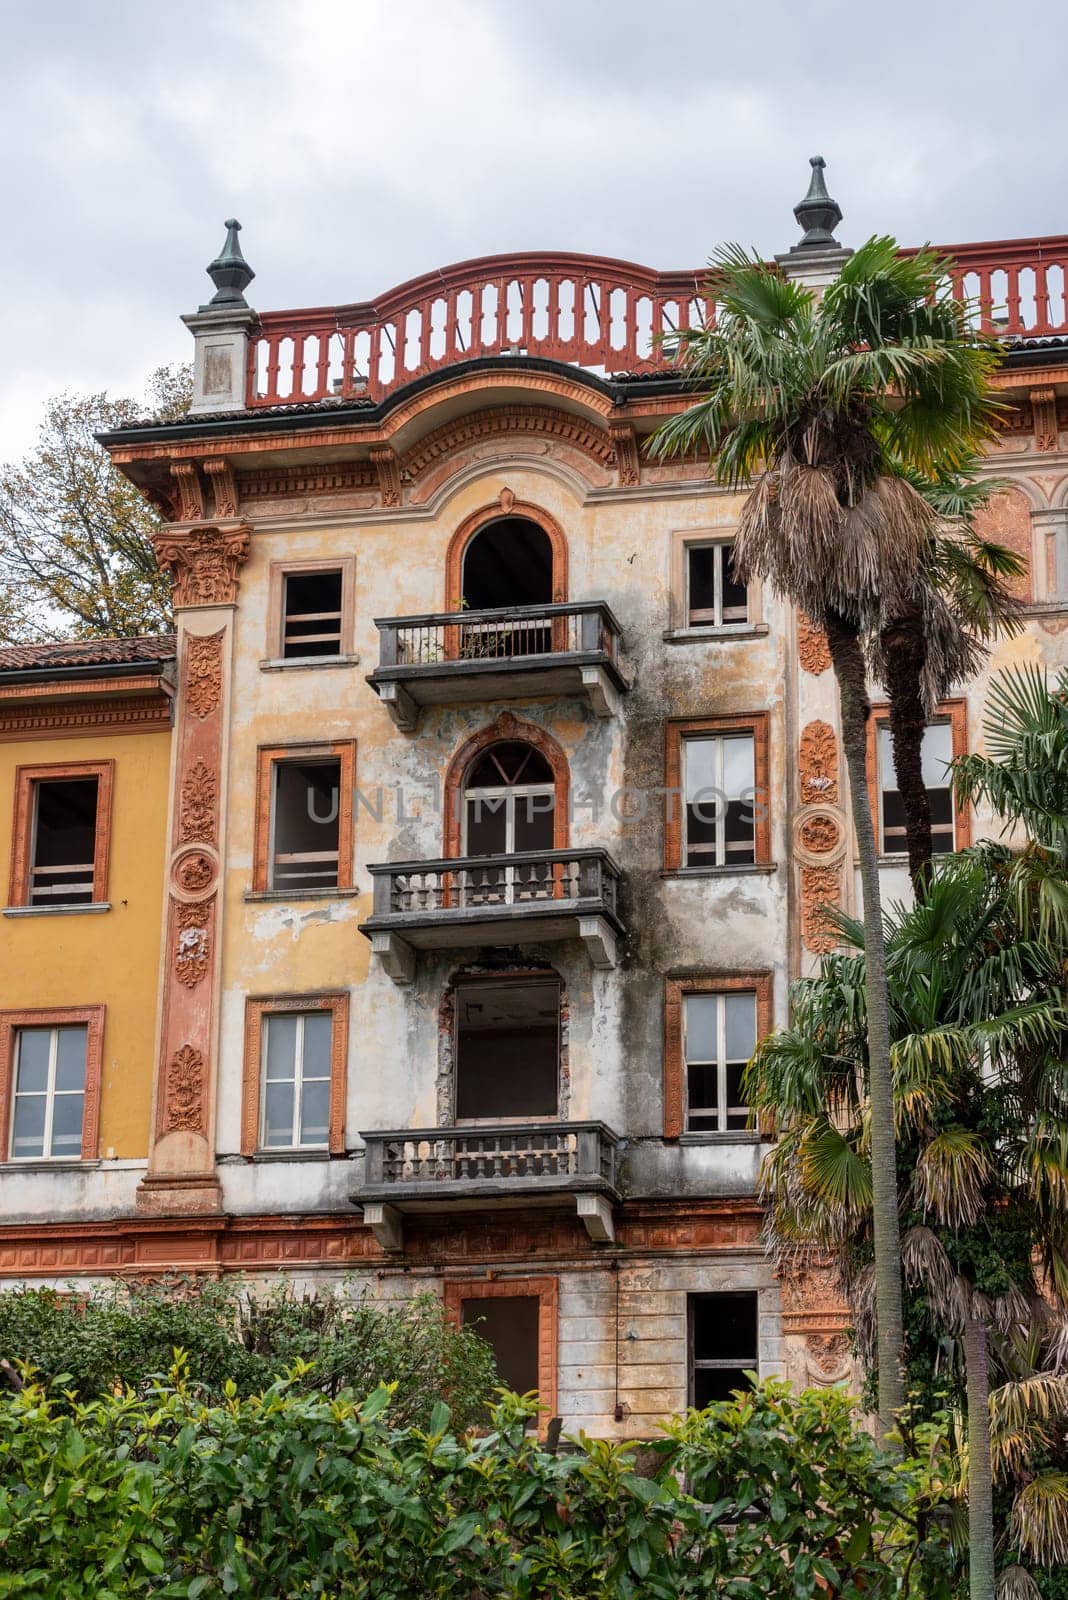 Ruin of an old hotel palace in Bellagio at lake Como, Italy